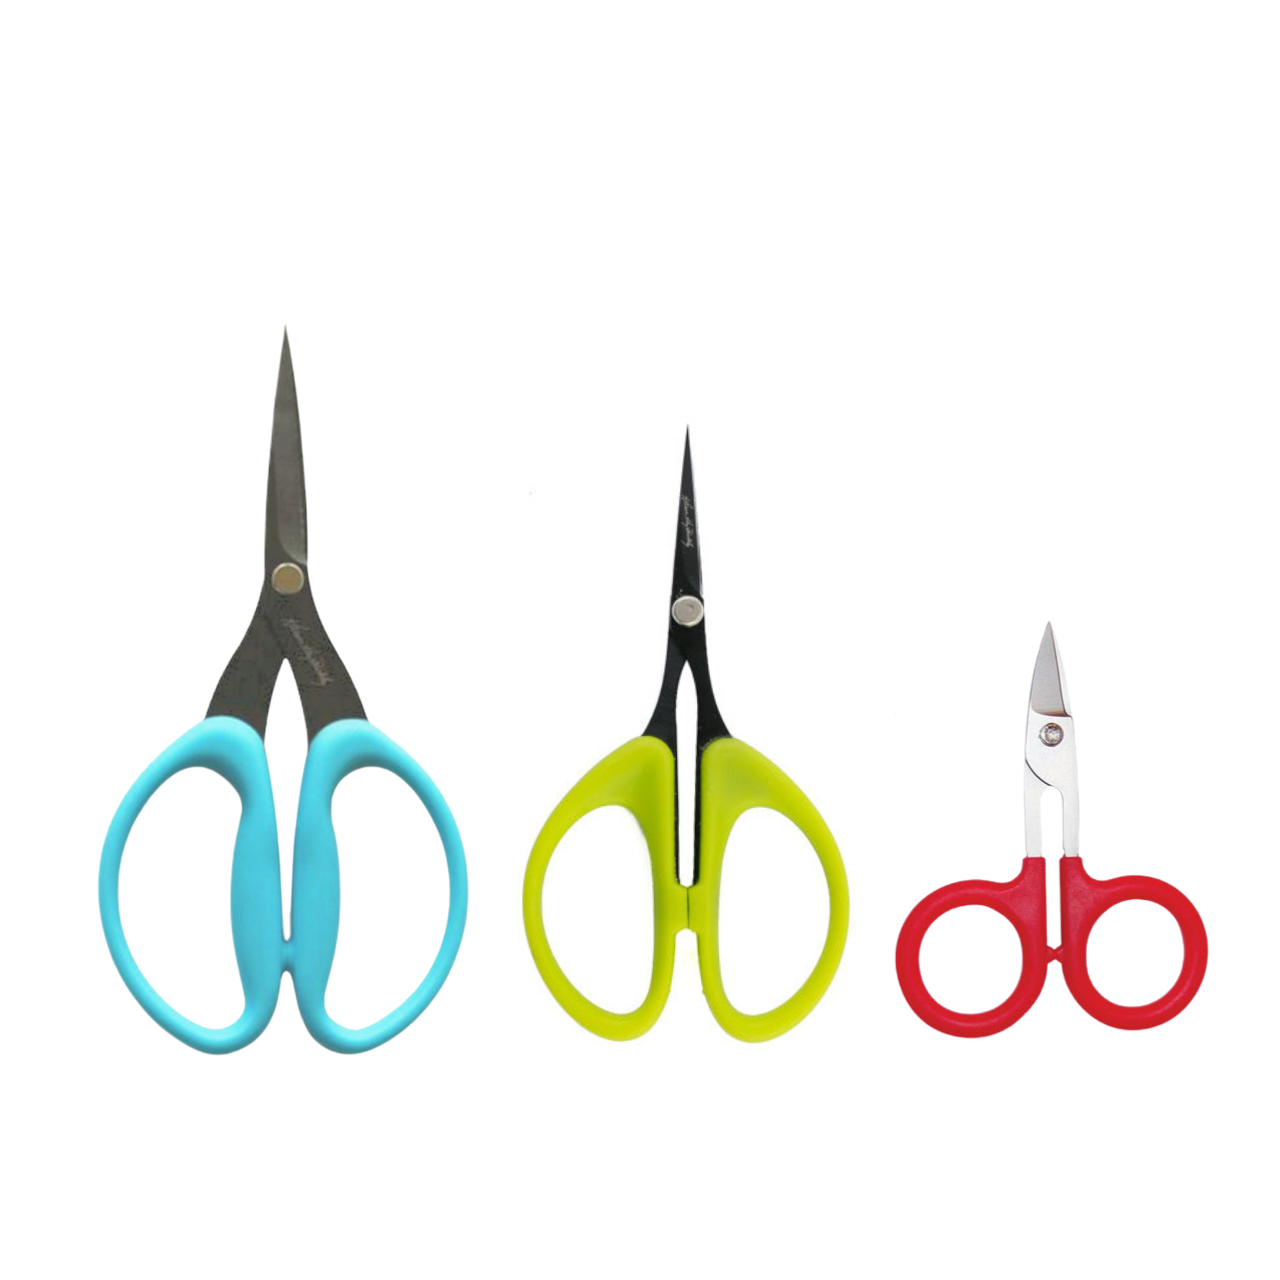 Karen Kay Buckley Perfect Scissors for Quilting and Sewing